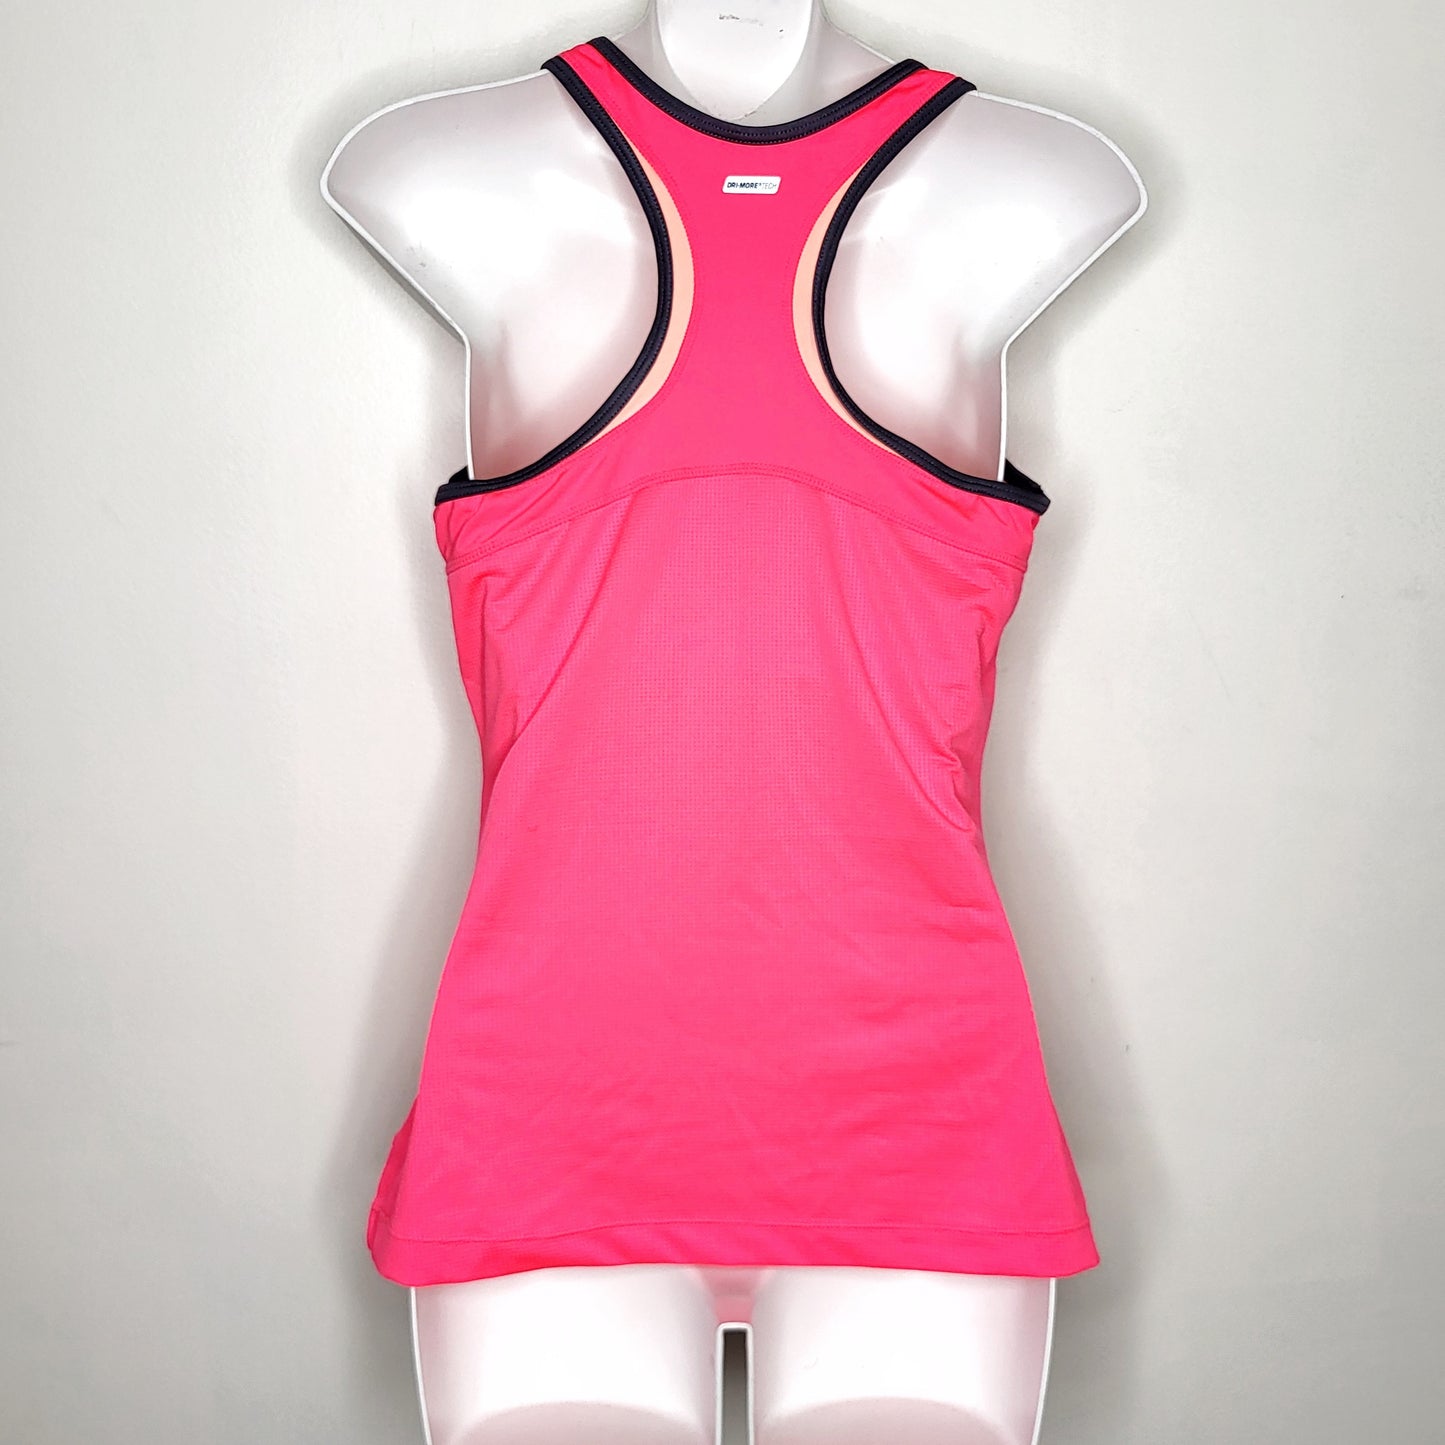 PMOR1 - Athletic Works pink and orange active tank top, size medium, good condition